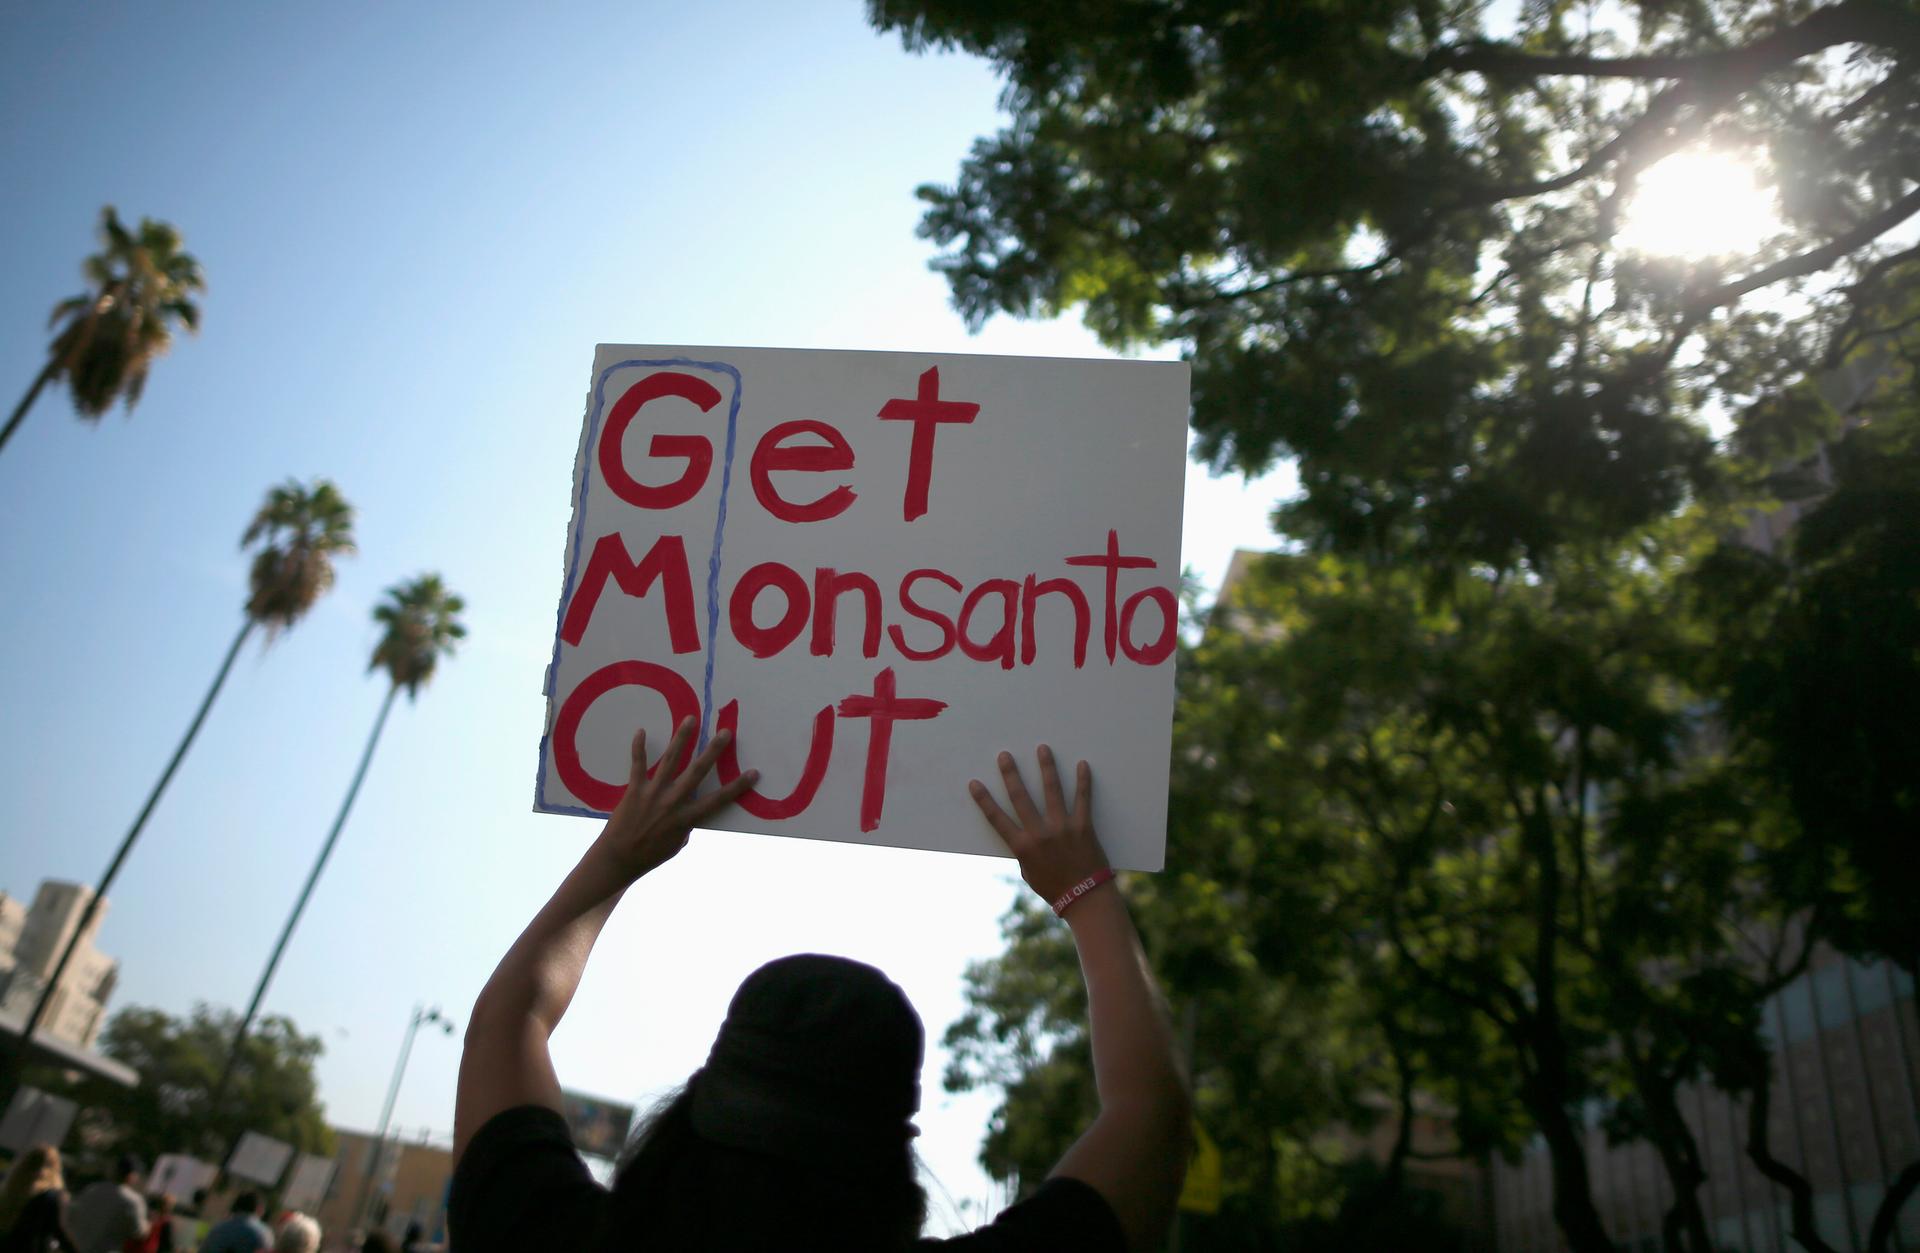 People hold signs during one of many worldwide "March Against Monsanto" protests against Genetically Modified Organisms (GMOs) and agro-chemicals, in Los Angeles on October 12, 2013. 